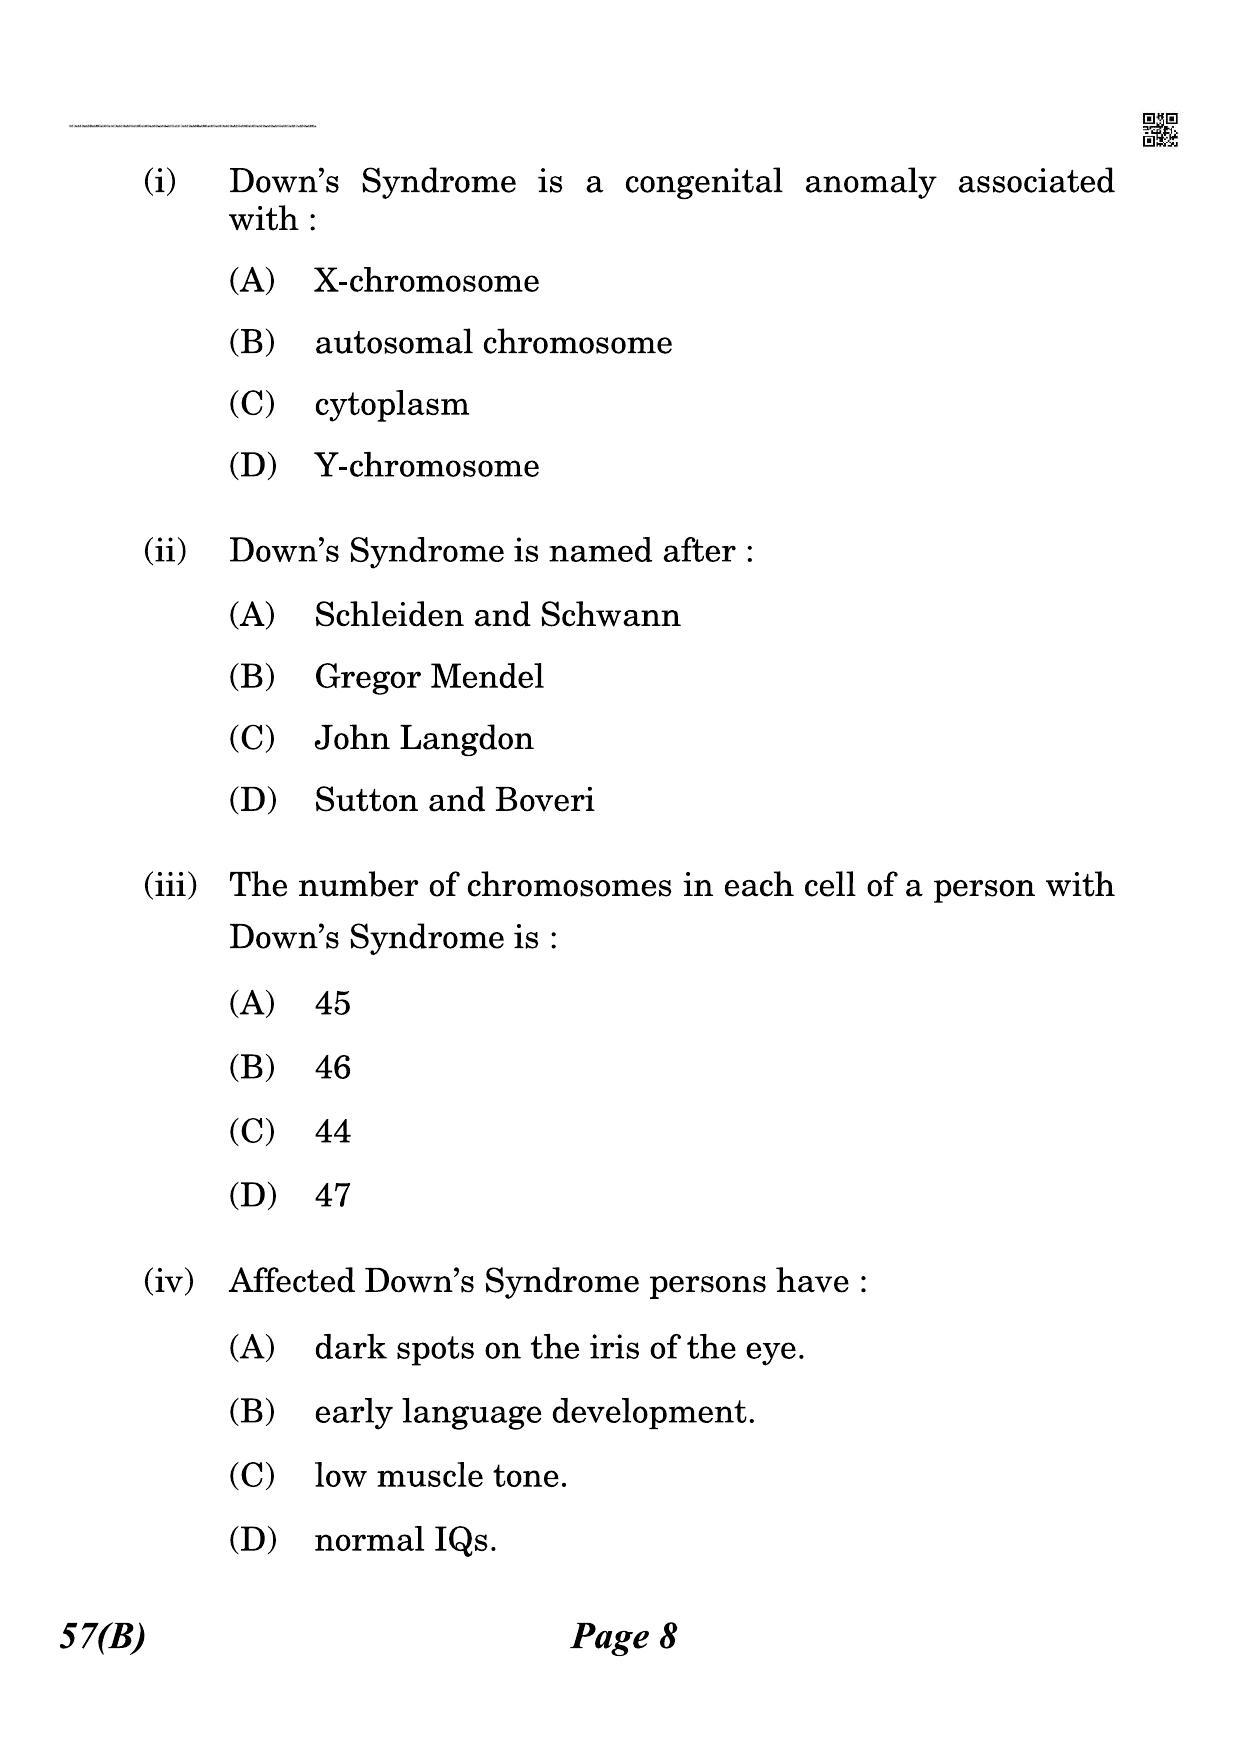 CBSE Class 12 QP_044_biology_for_visually_impared_candidates 2021 Compartment Question Paper - Page 8